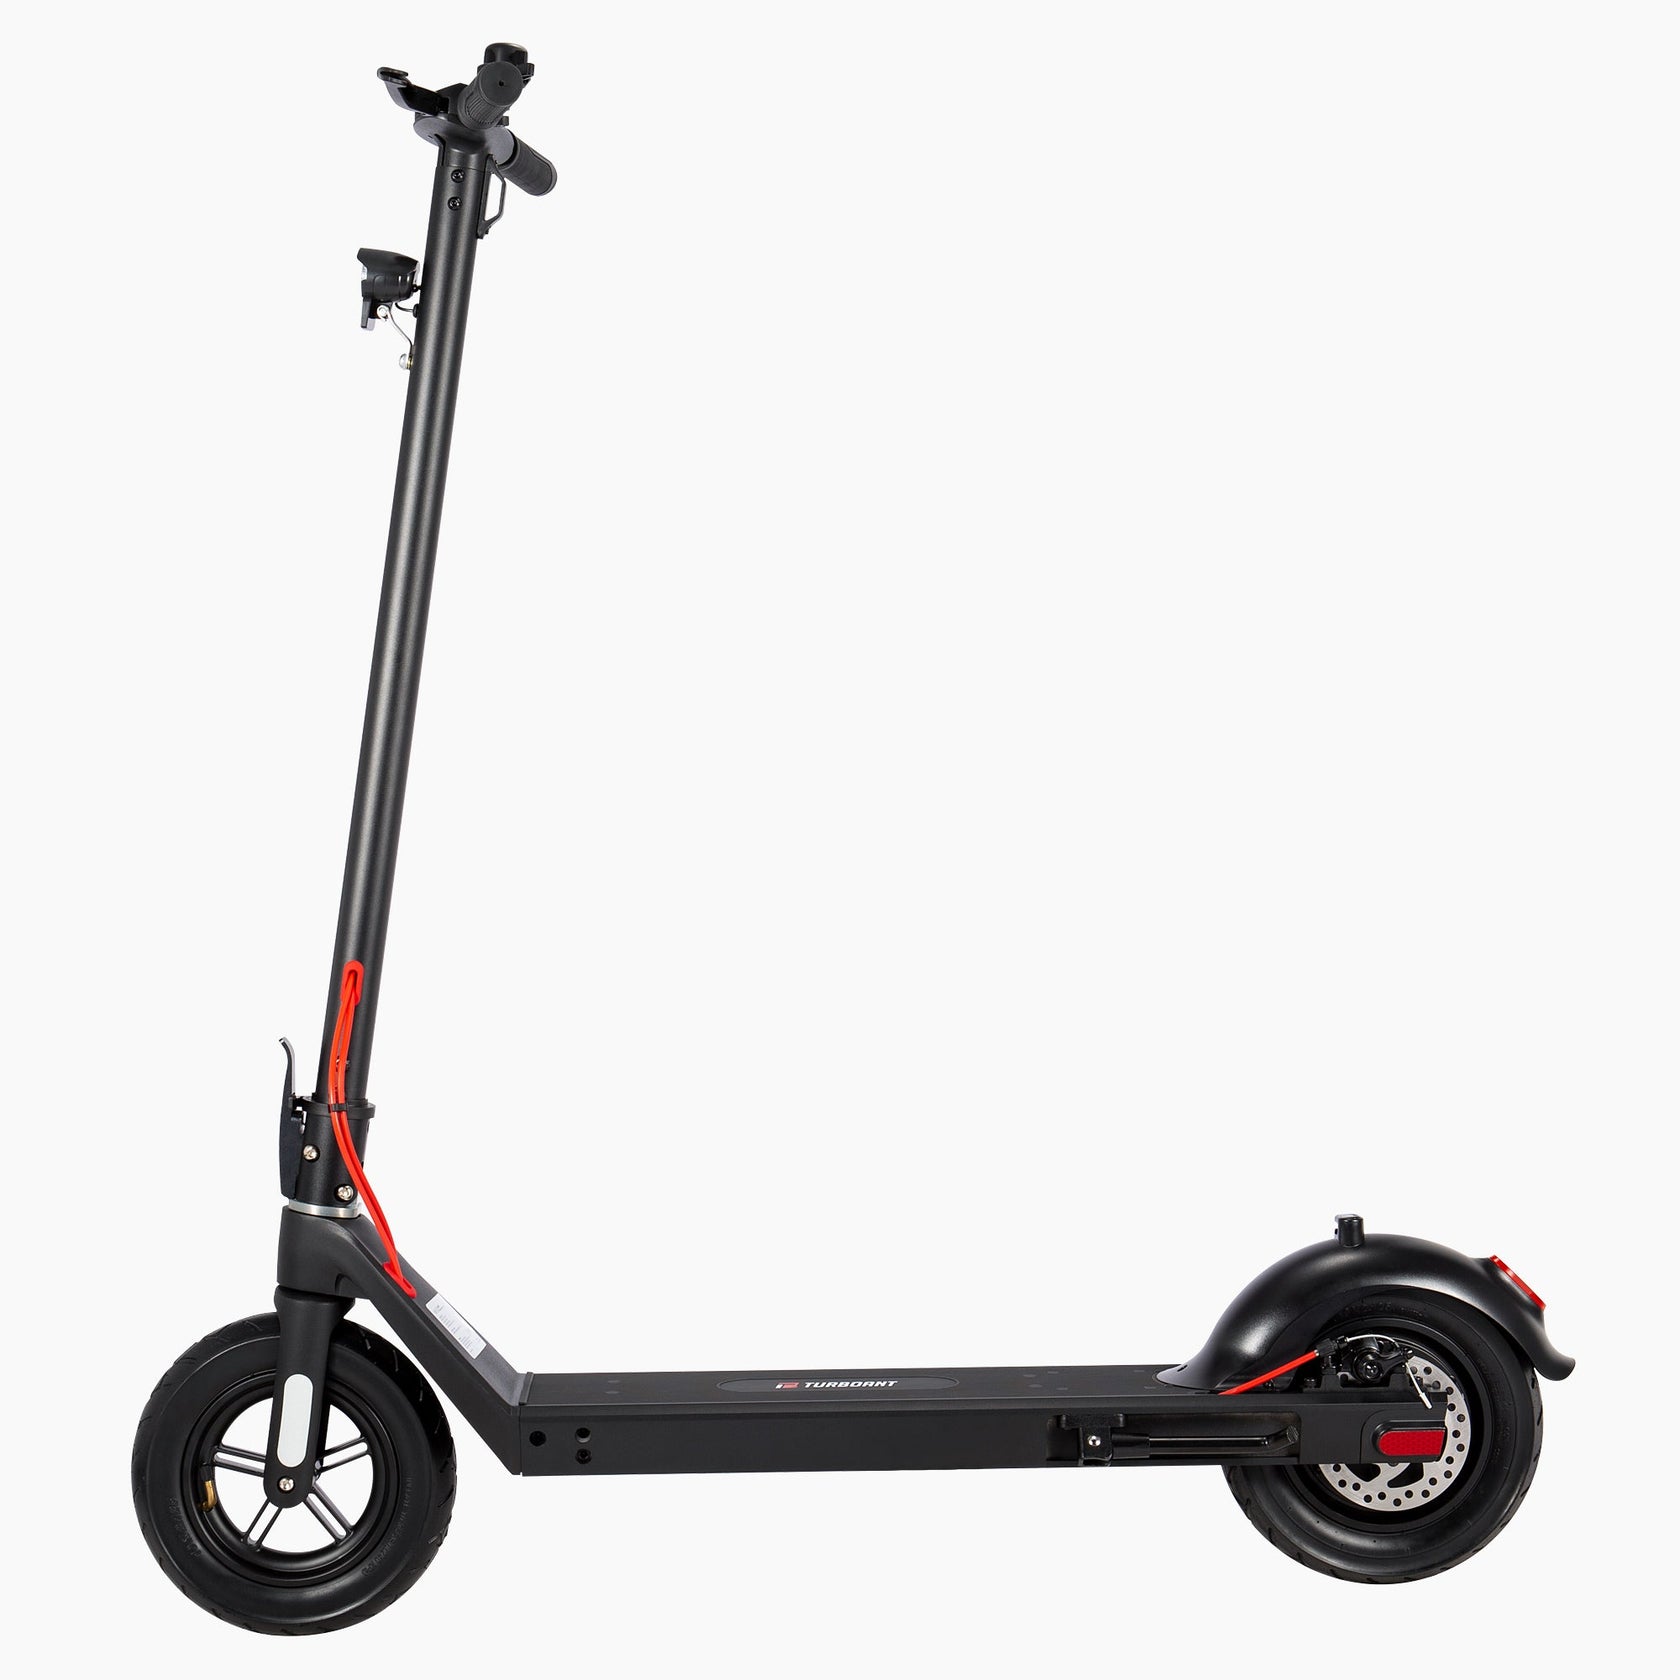 Turboant 2 wheel electric scooter 